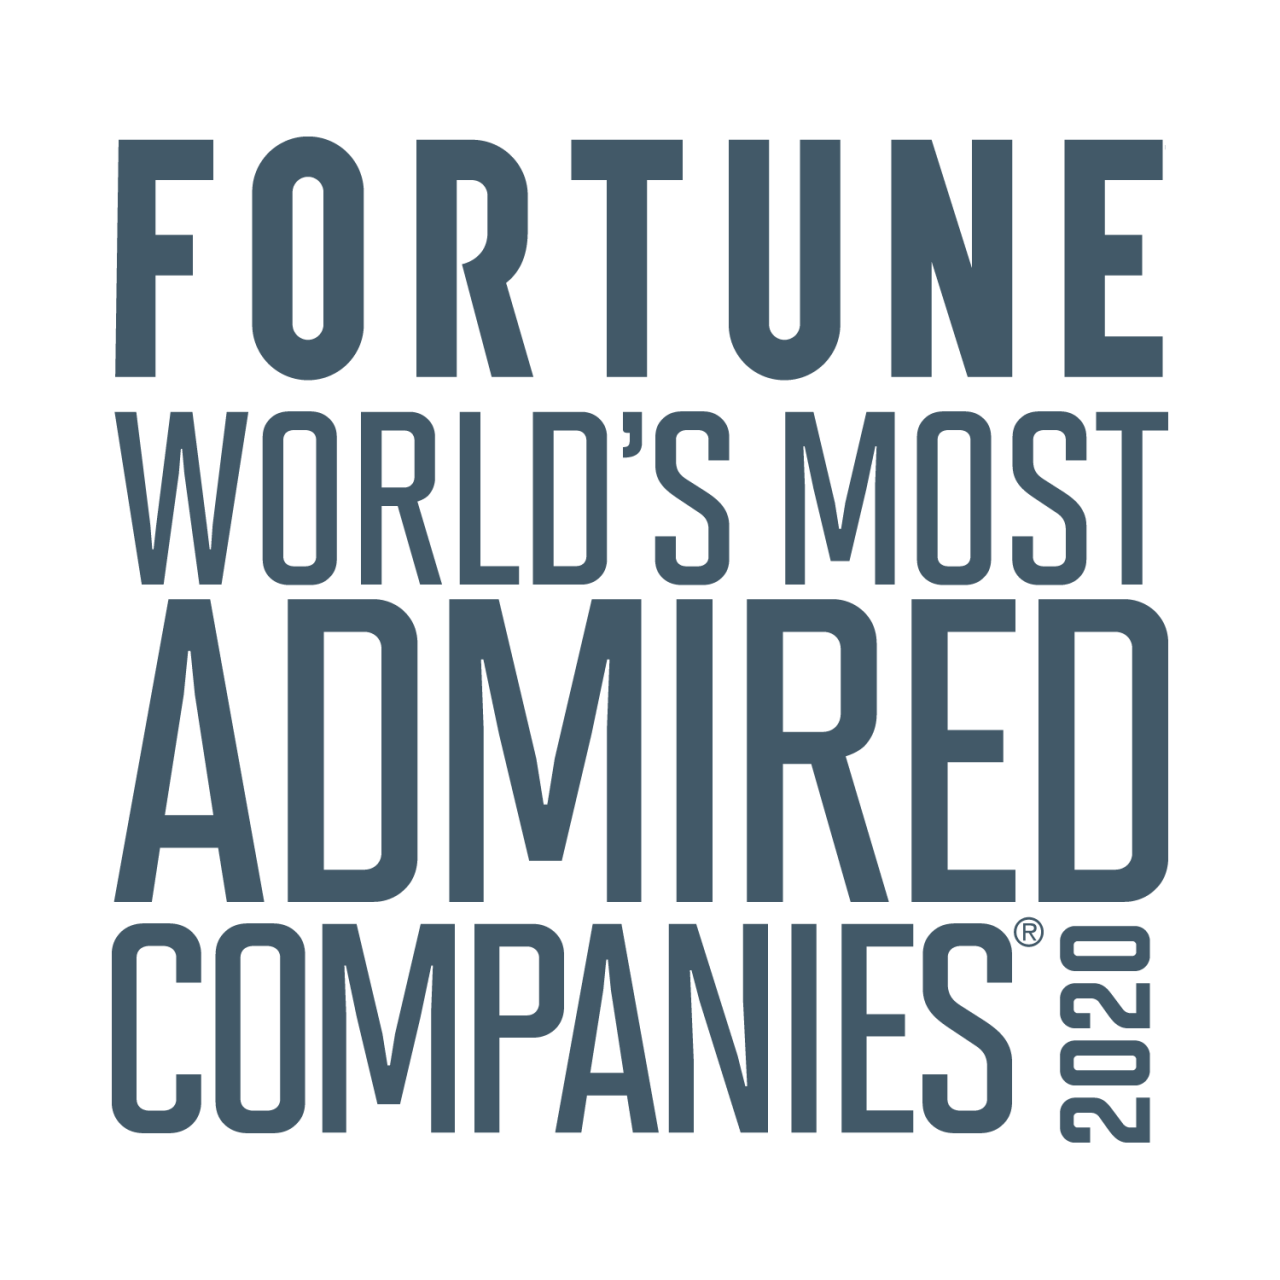 Fortune: World's Most Admired Companies - 2020